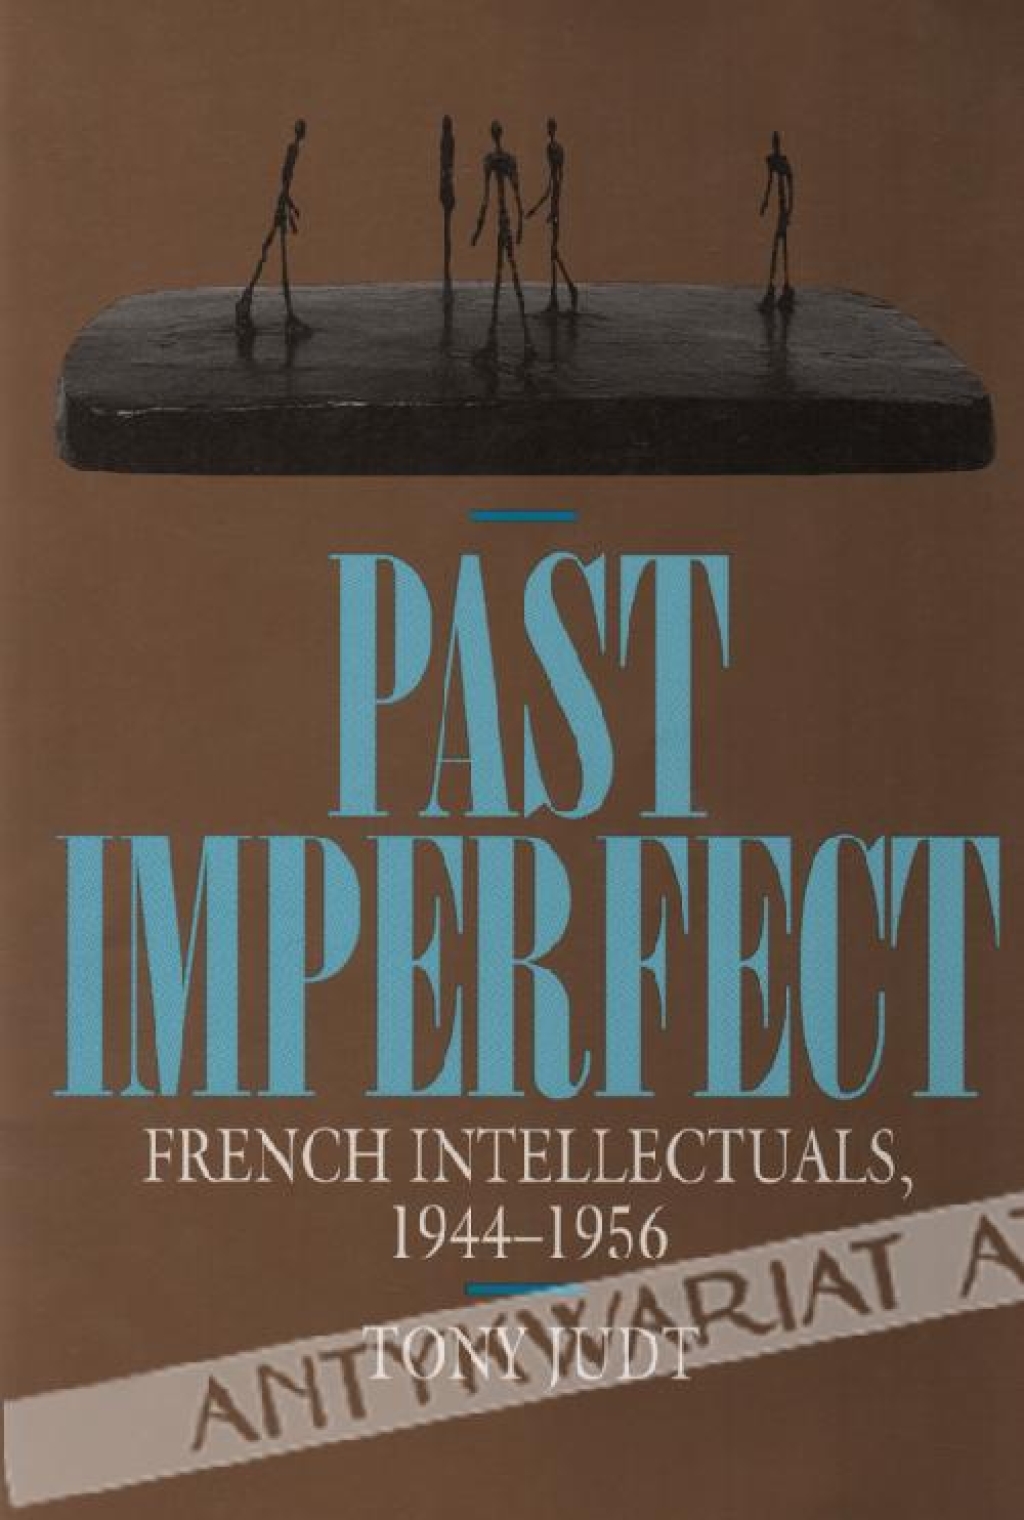 Past Imperfect. French Intellectuals, 1944-1956